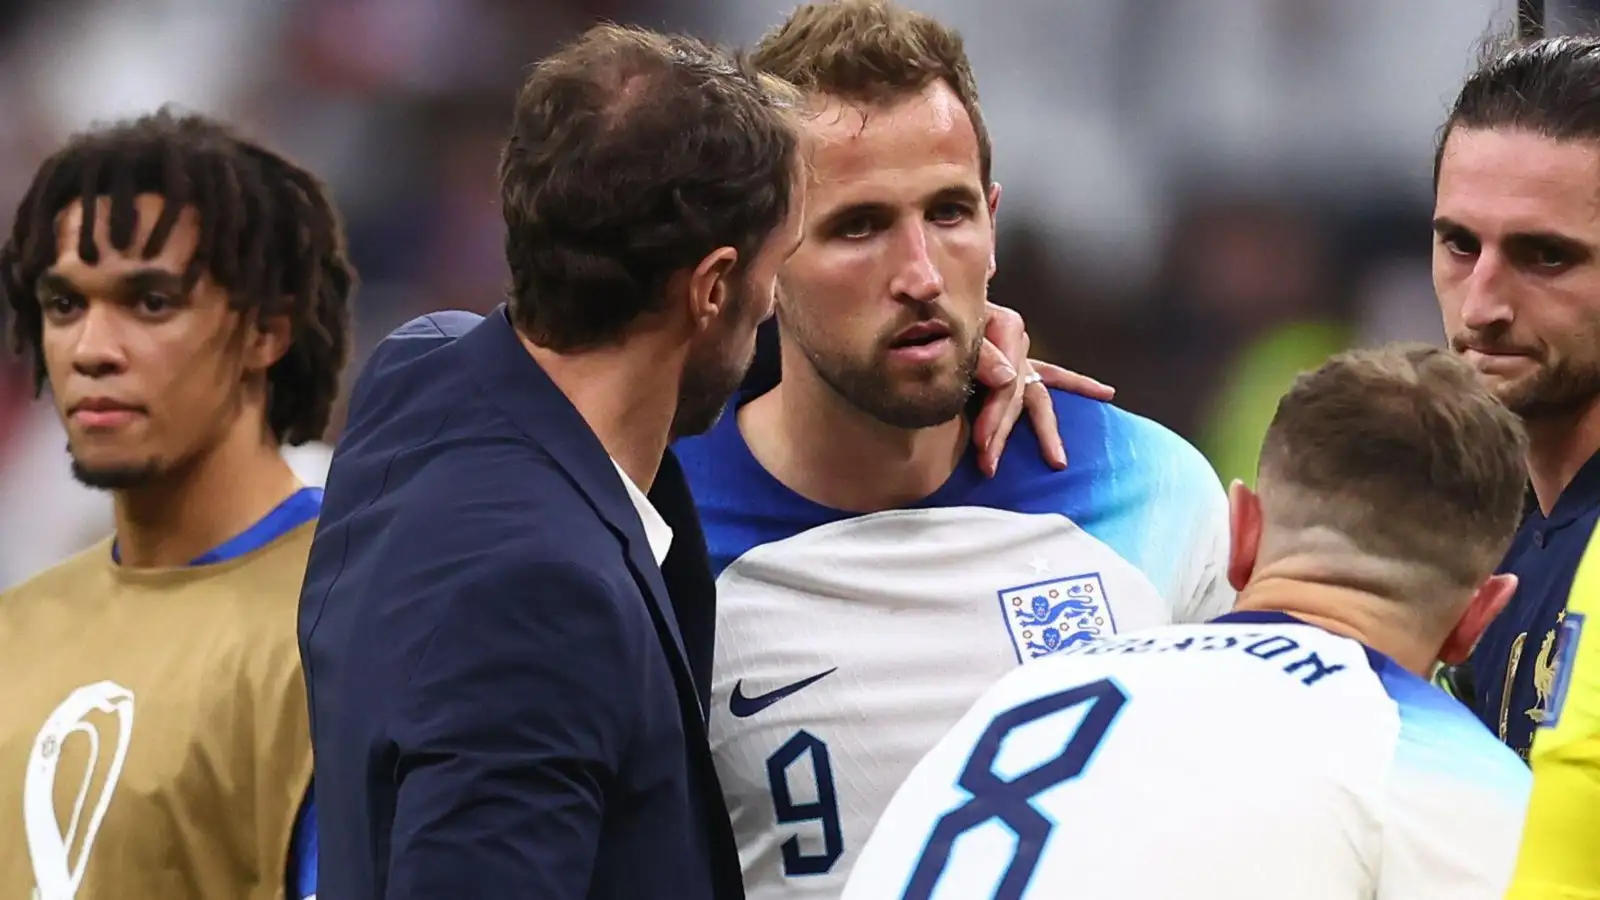 Goals? No Harry Kane doesn't need to score for England to win